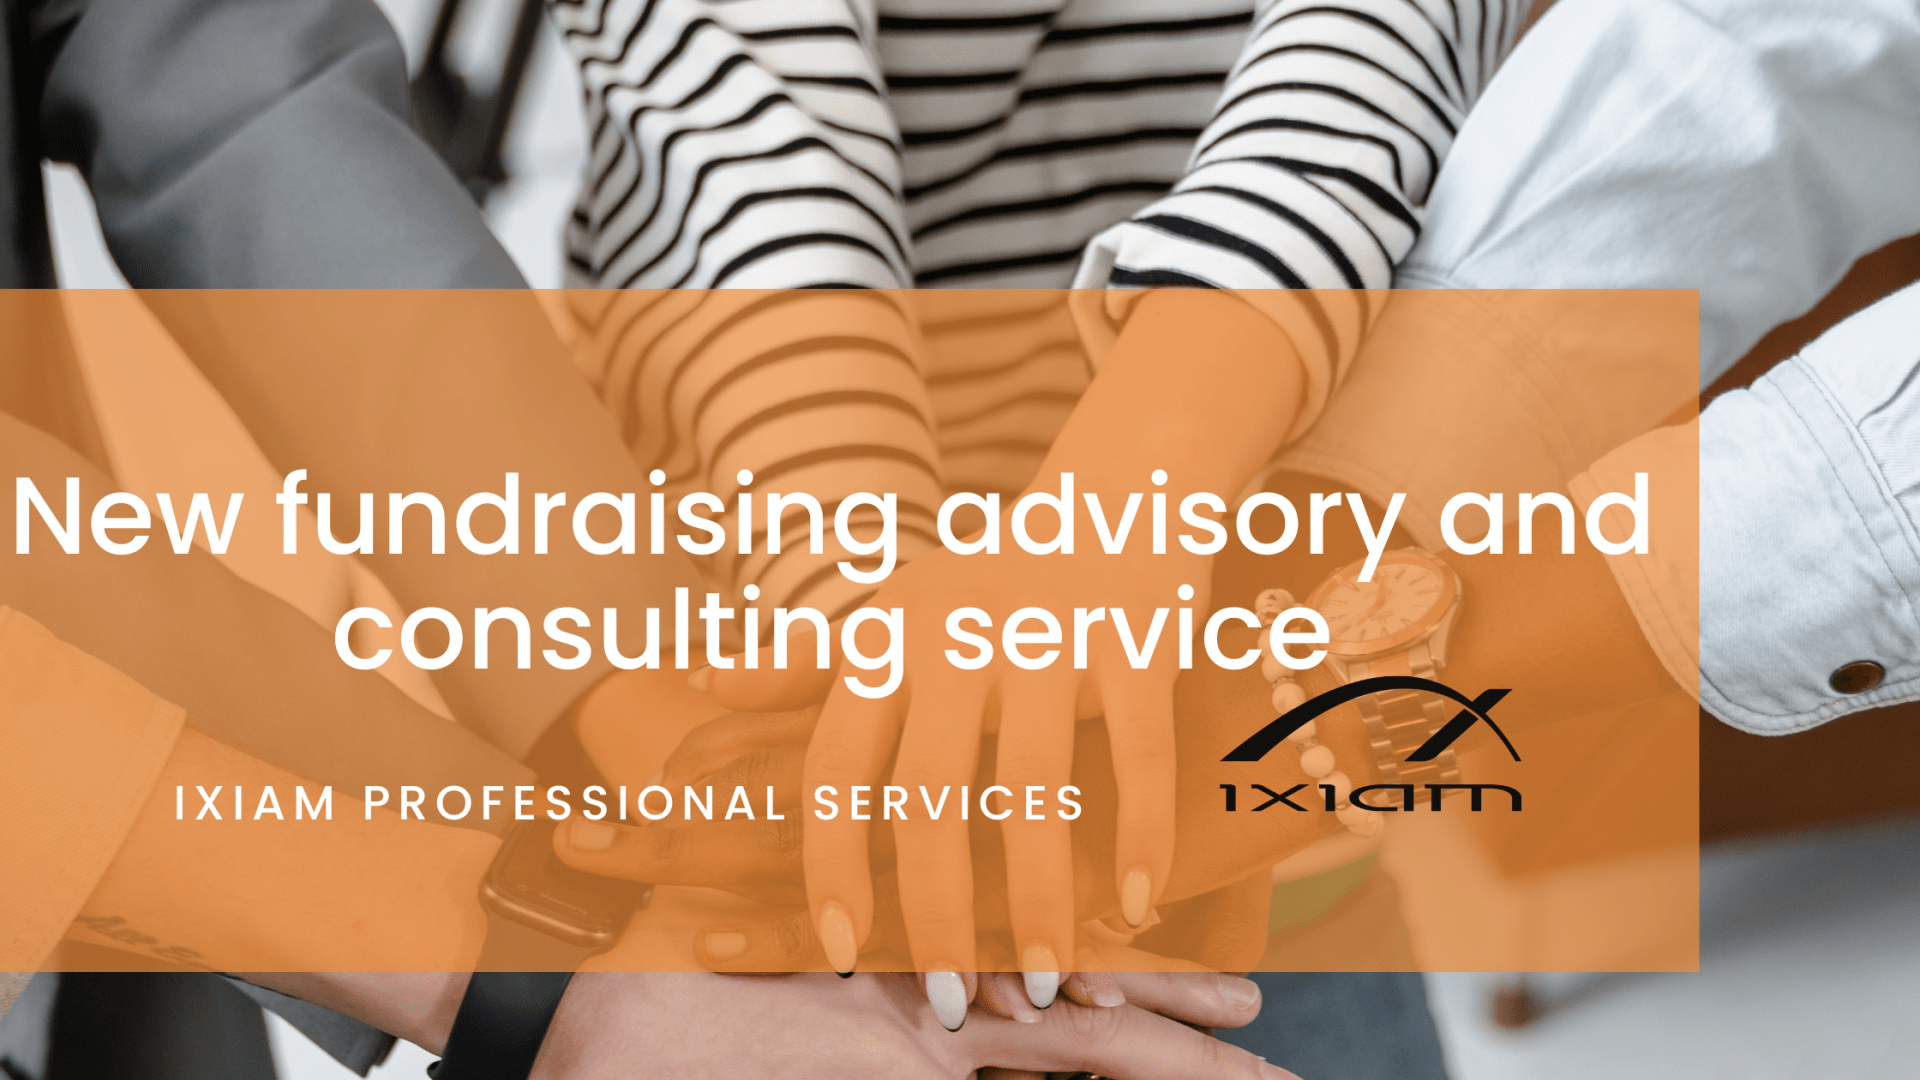 iXiam's new fundraising advisory and consulting service